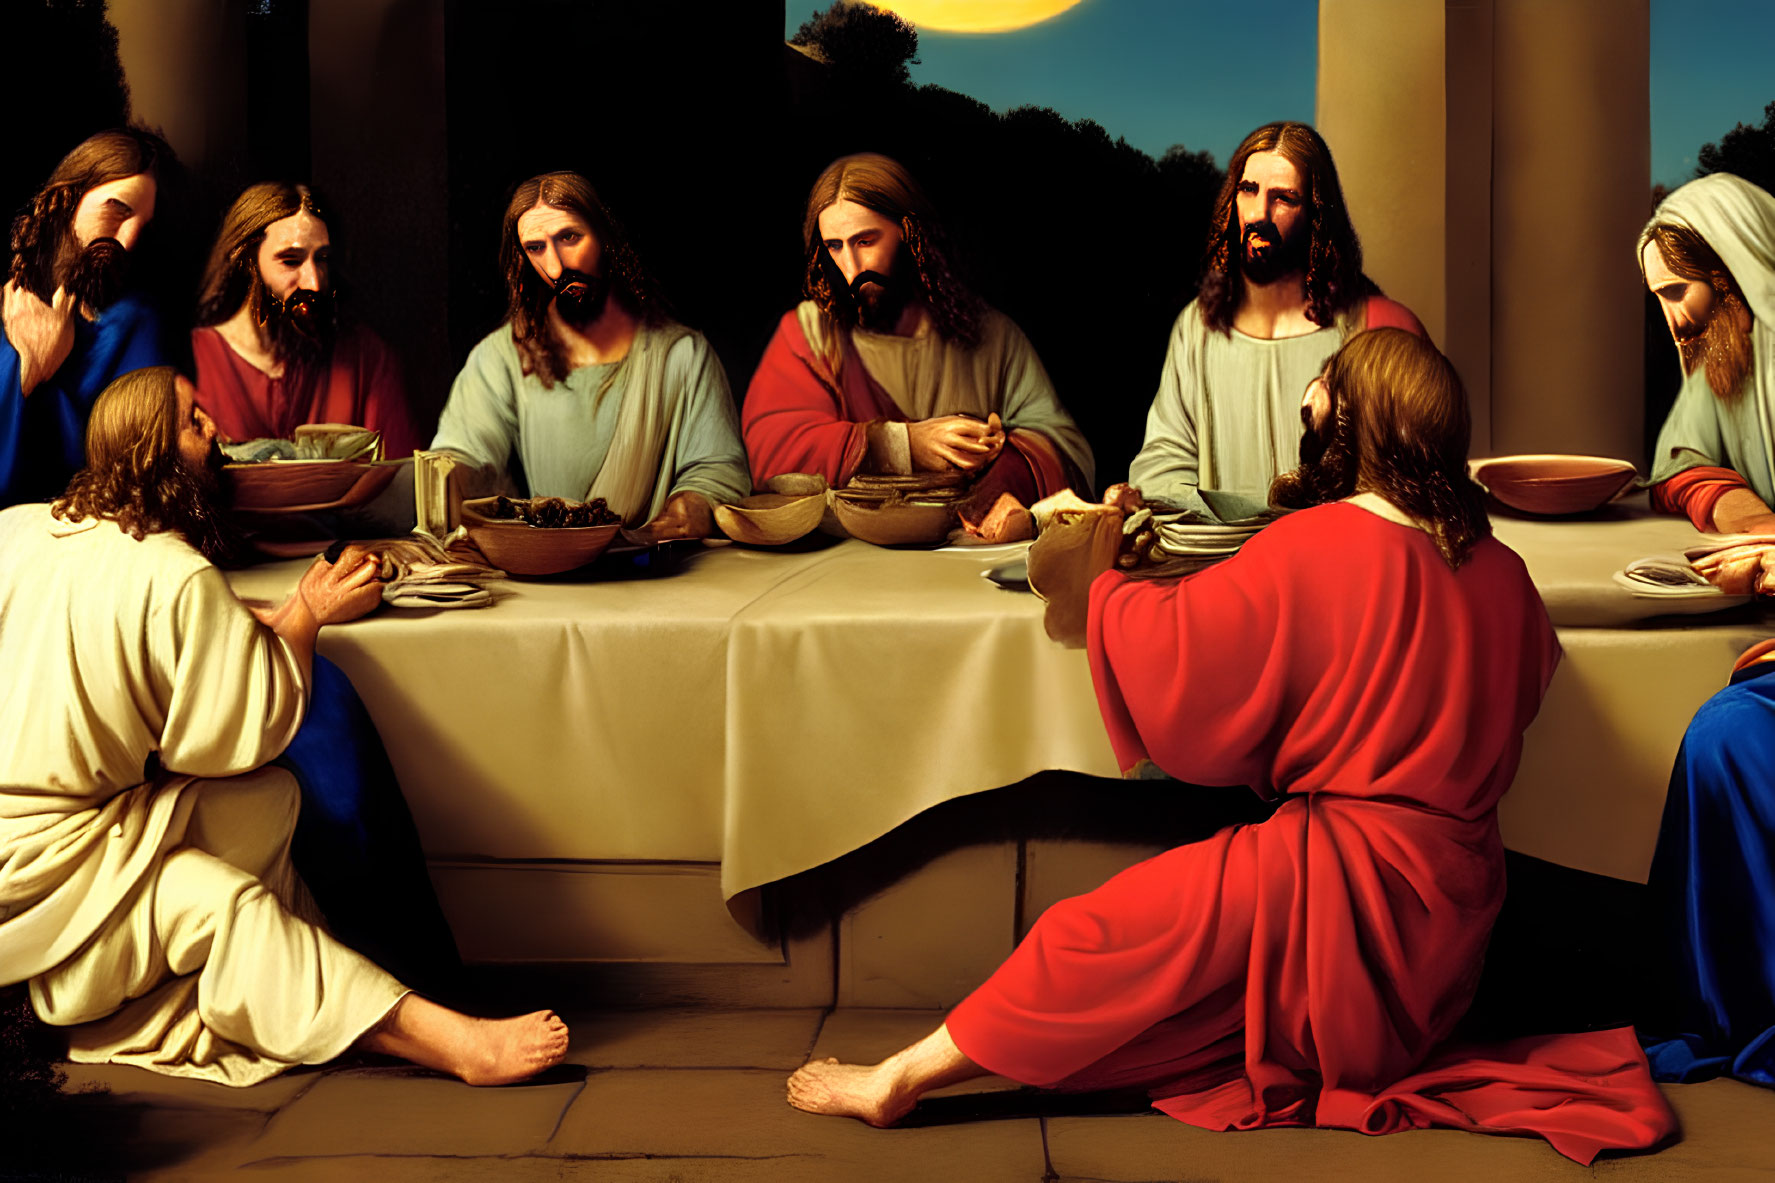 Religious painting of Last Supper scene with Jesus and twelve disciples.